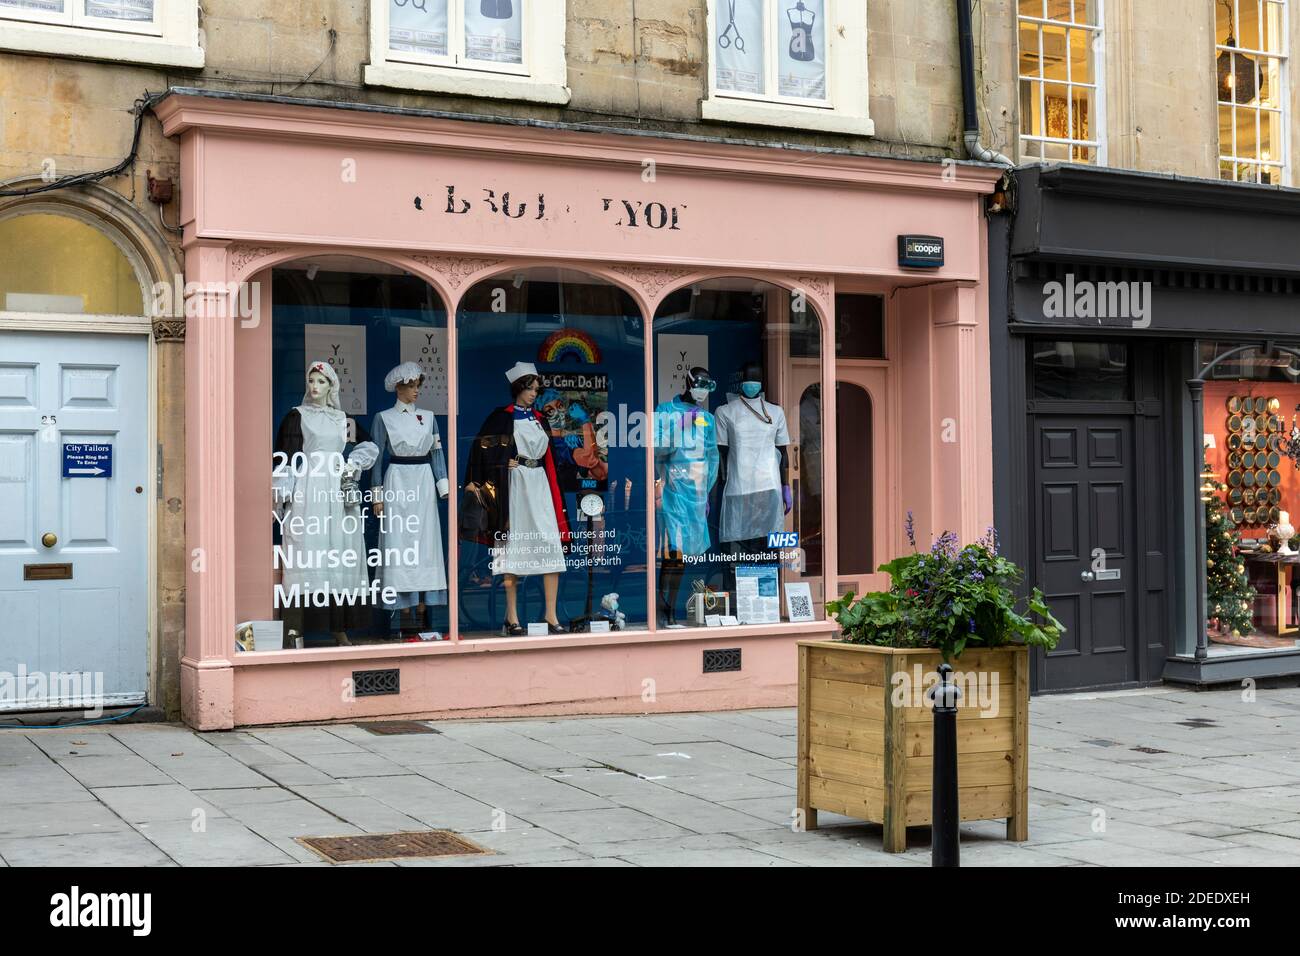 A shop window in Bath City centre celebrating 2020 being the International Year of the Nurse and Midwife. Milsom Street, Bath City centre, England, UK Stock Photo